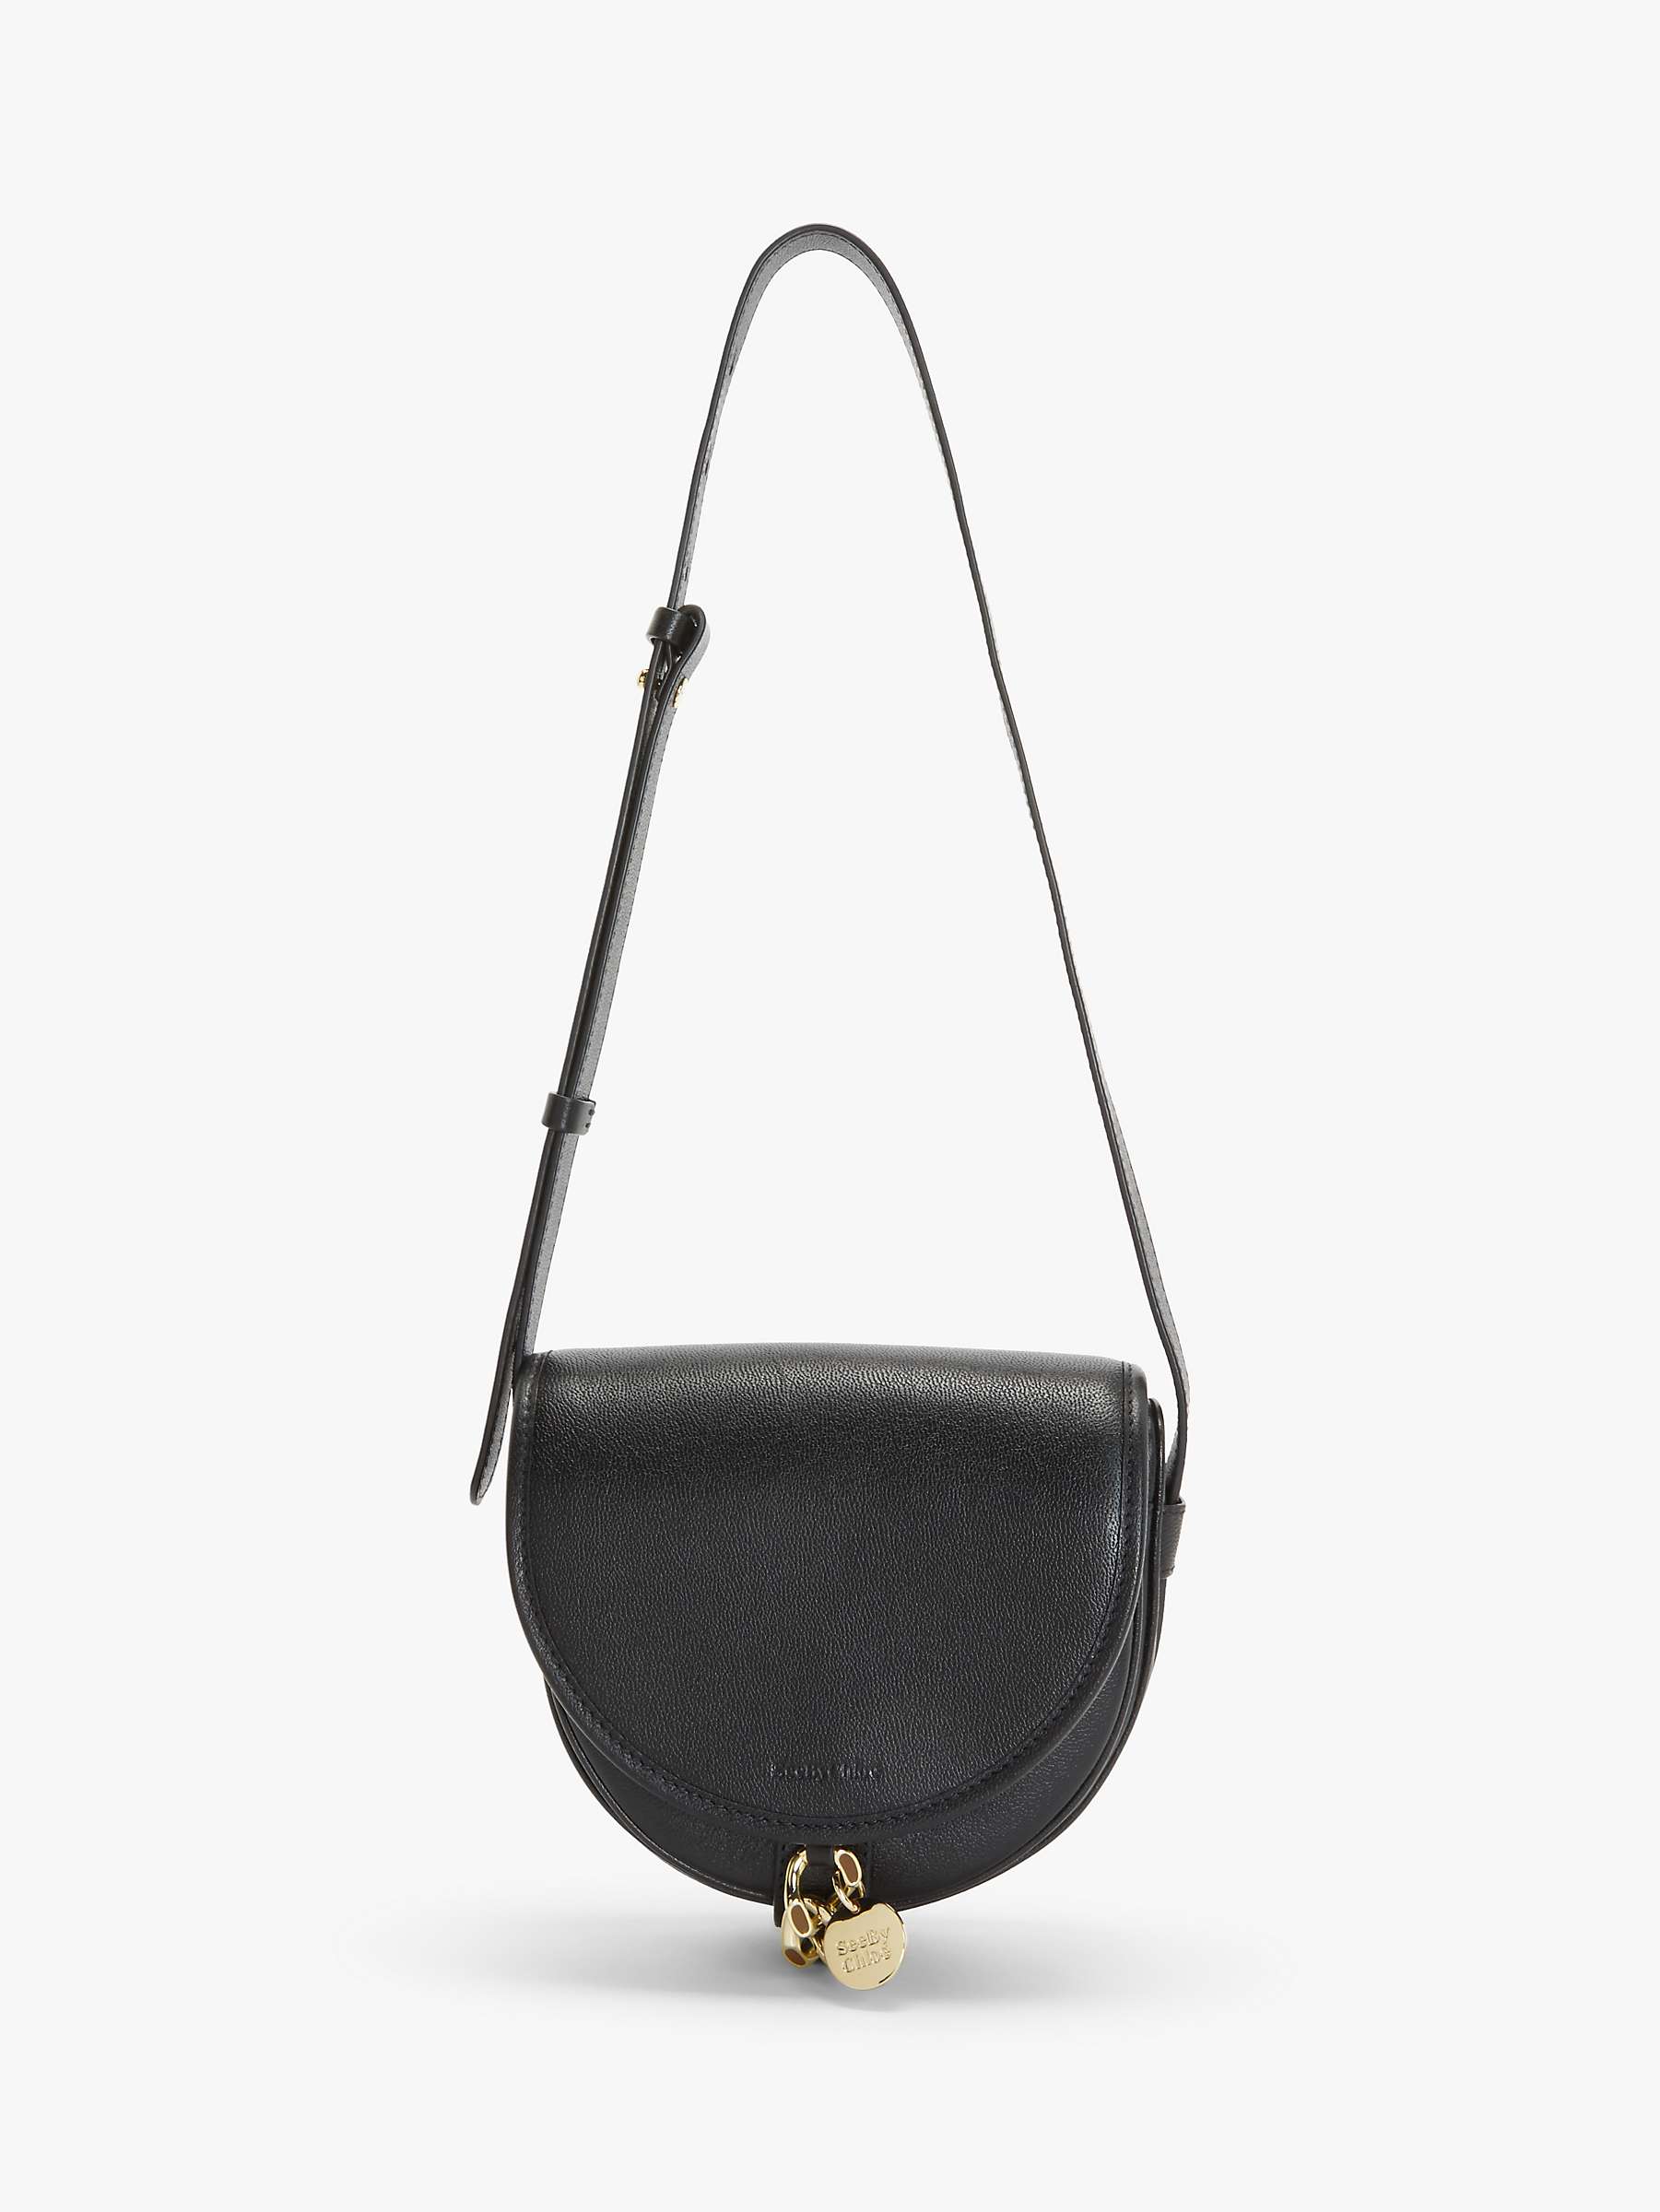 Buy See By Chloé Mara Small Leather Saddle Cross Body Bag Online at johnlewis.com